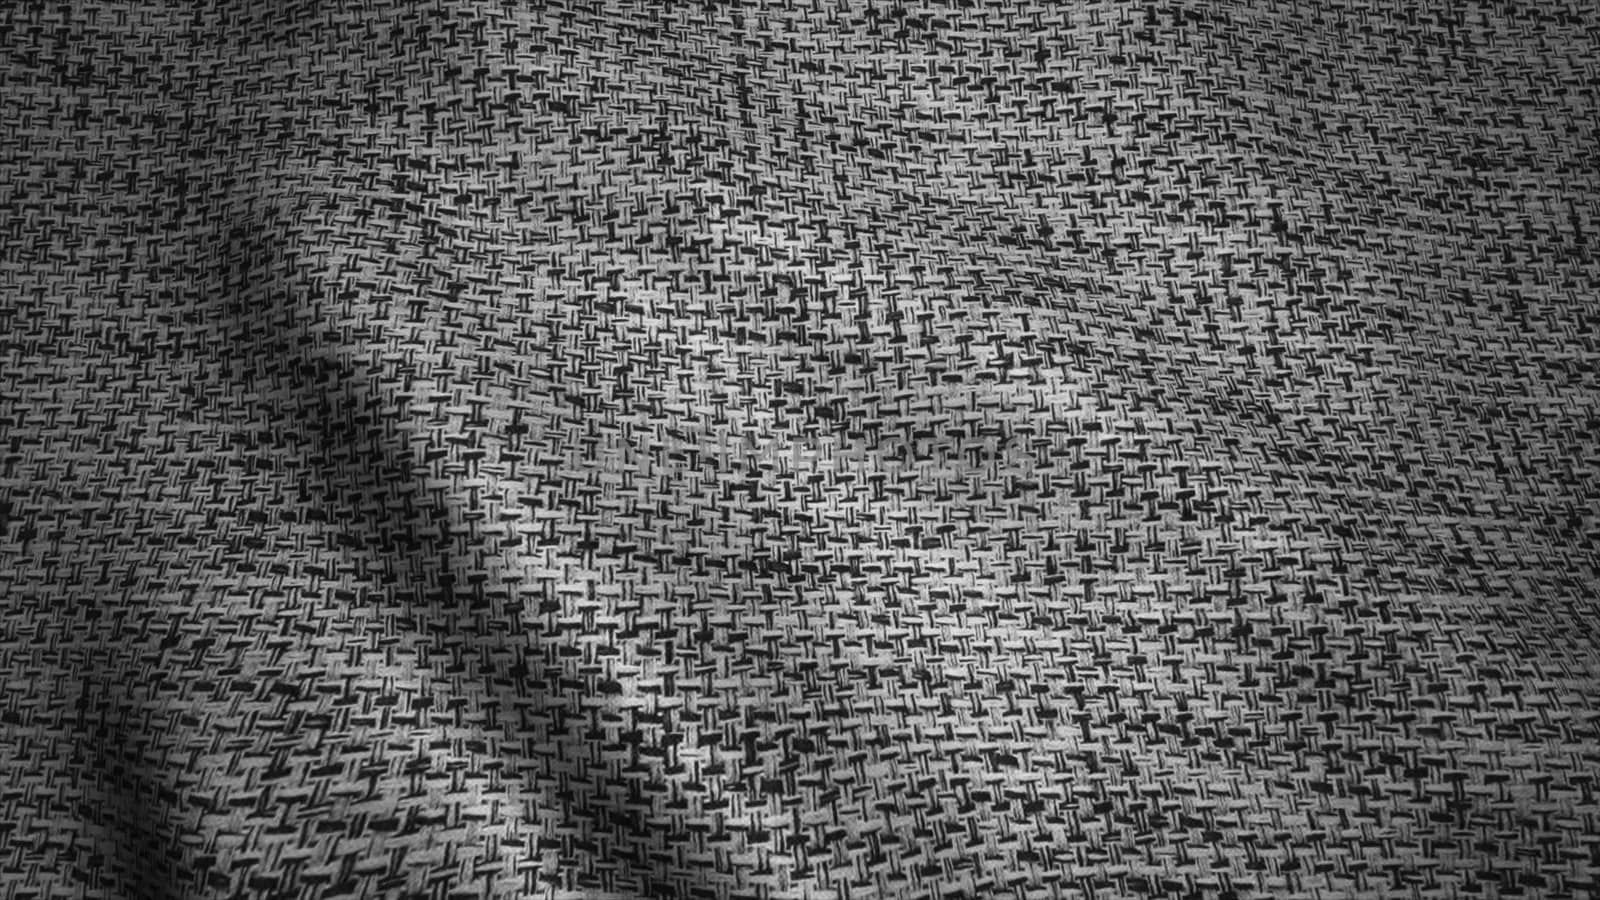 Highly detailed texture of burlap. Sackcloth background